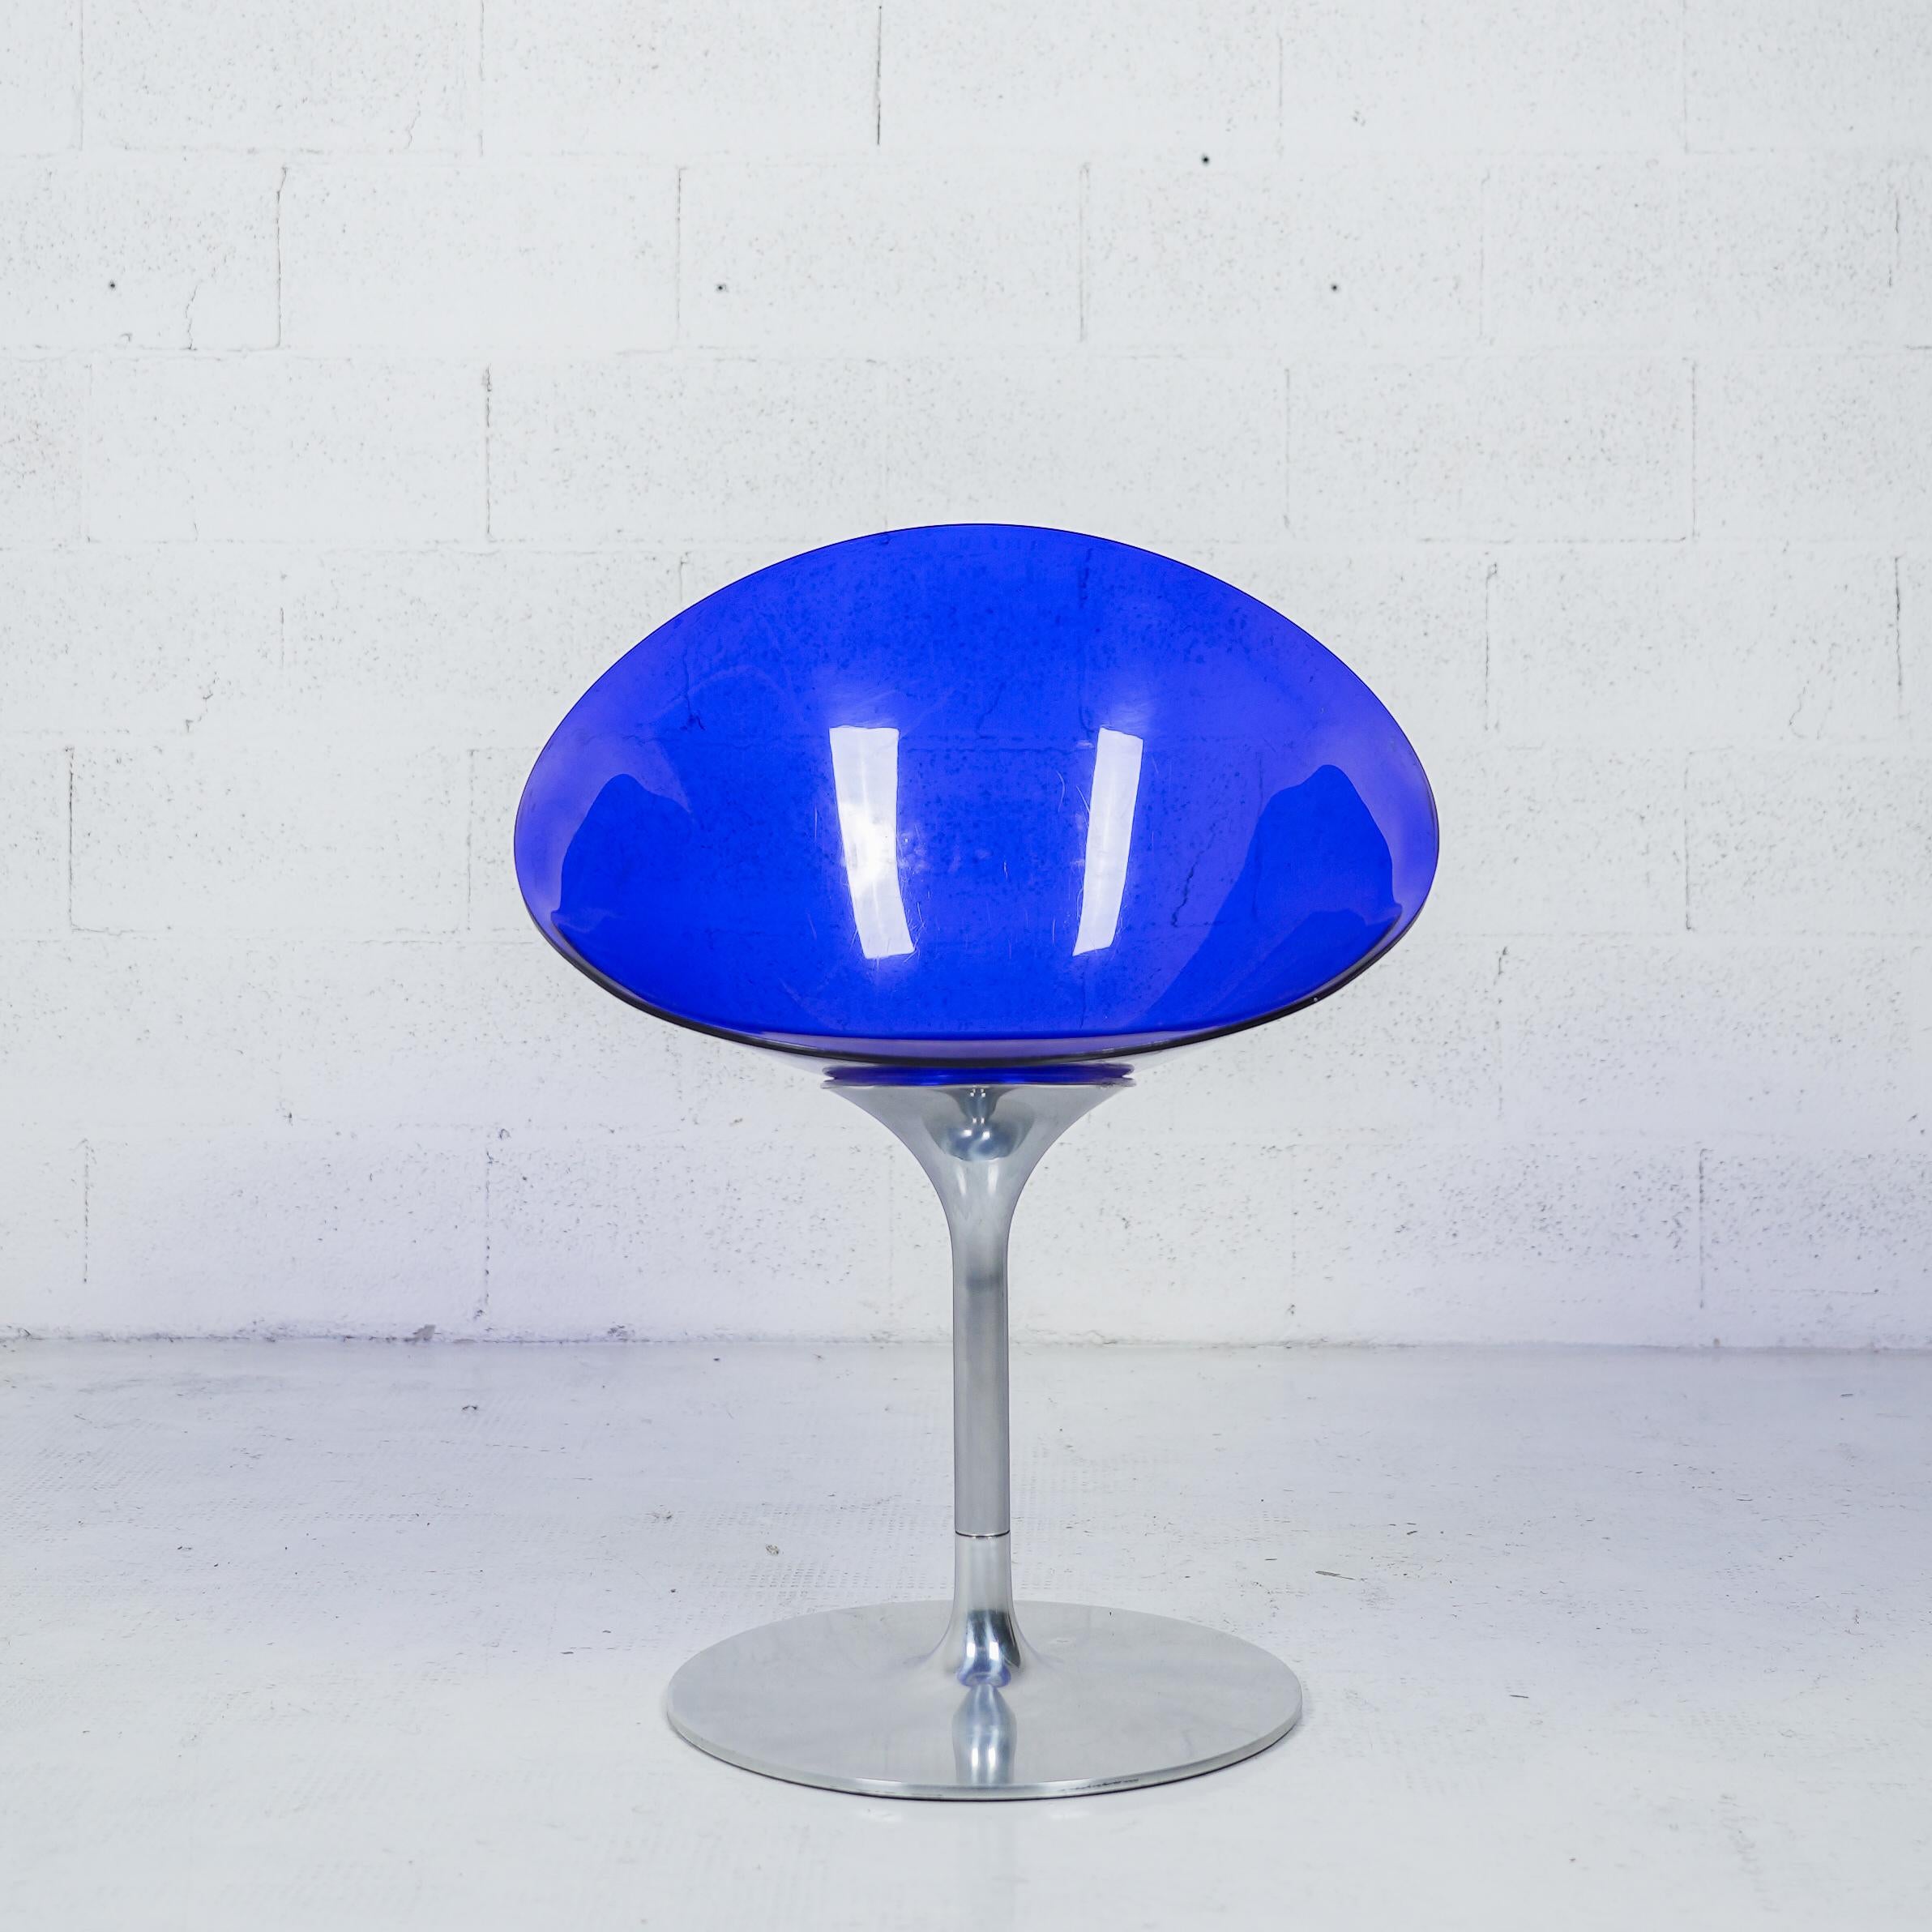 Eros is an enveloping armchair, with an organic egg shape, characterized by a refined combination of finishes and a skilful use of colour. Eros is ideal for the home, in the dining room or living room, but can also be used in offices as a